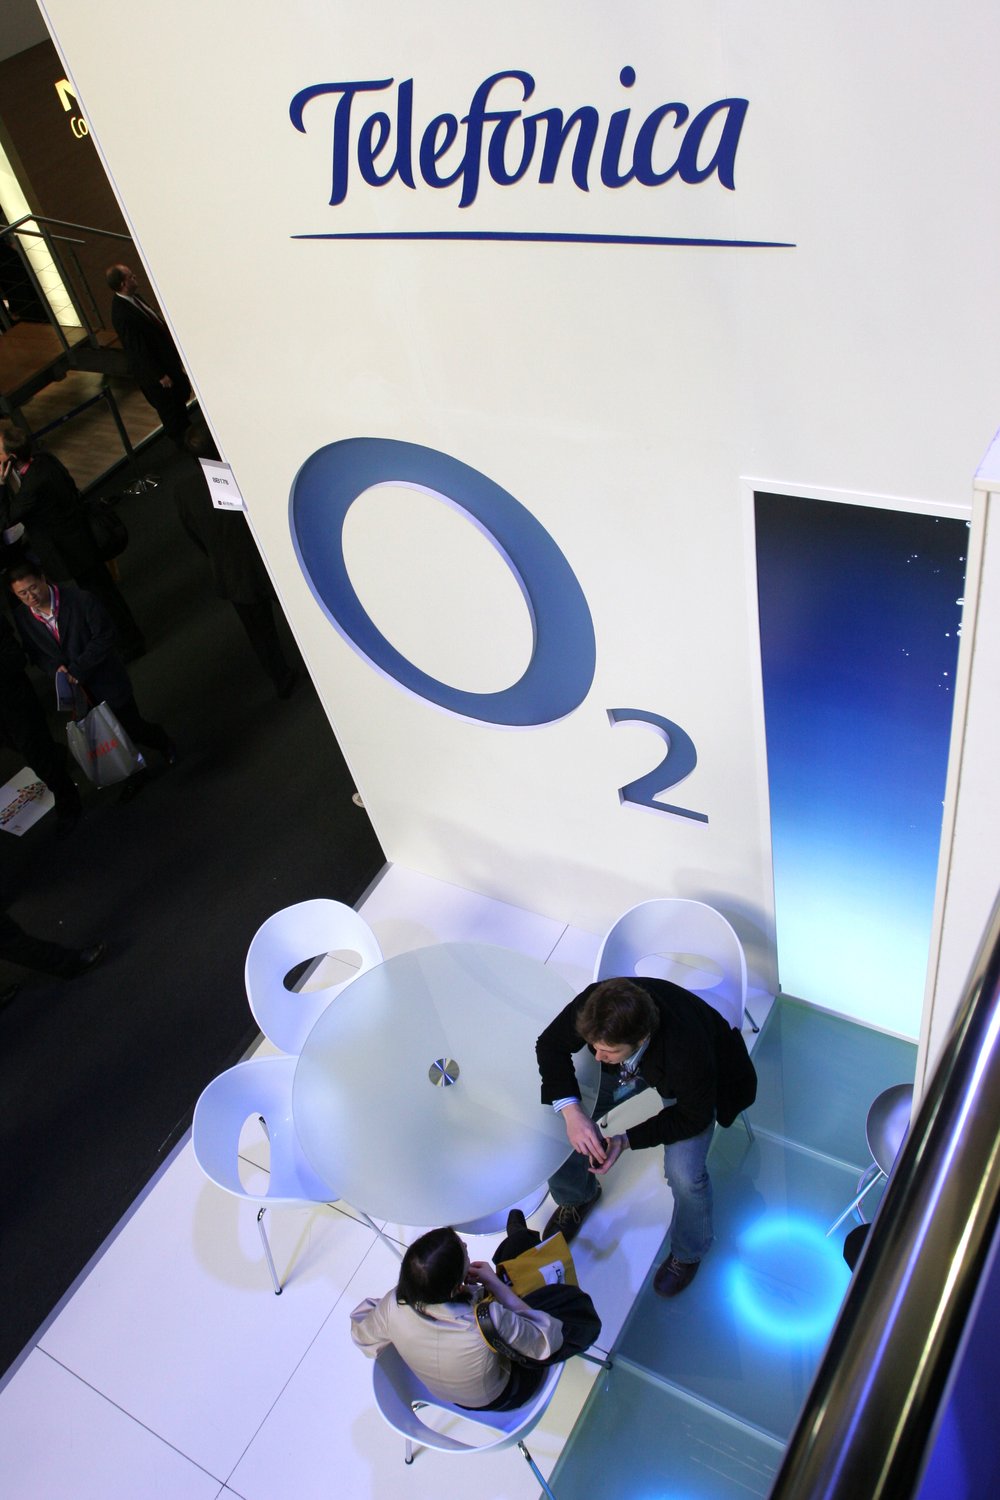 O2 PRESENTS AT 3GSM AMONG OTHER SERVICES: NEW STATE-OF-THE-ART HANDSETS WITH HDSPA 3.5G TECHNOLOGY AND BLUEBOOK, A SOLUTION FOR SECURELY STORING PHOTOS, MESSAGES AND CONTACTS.